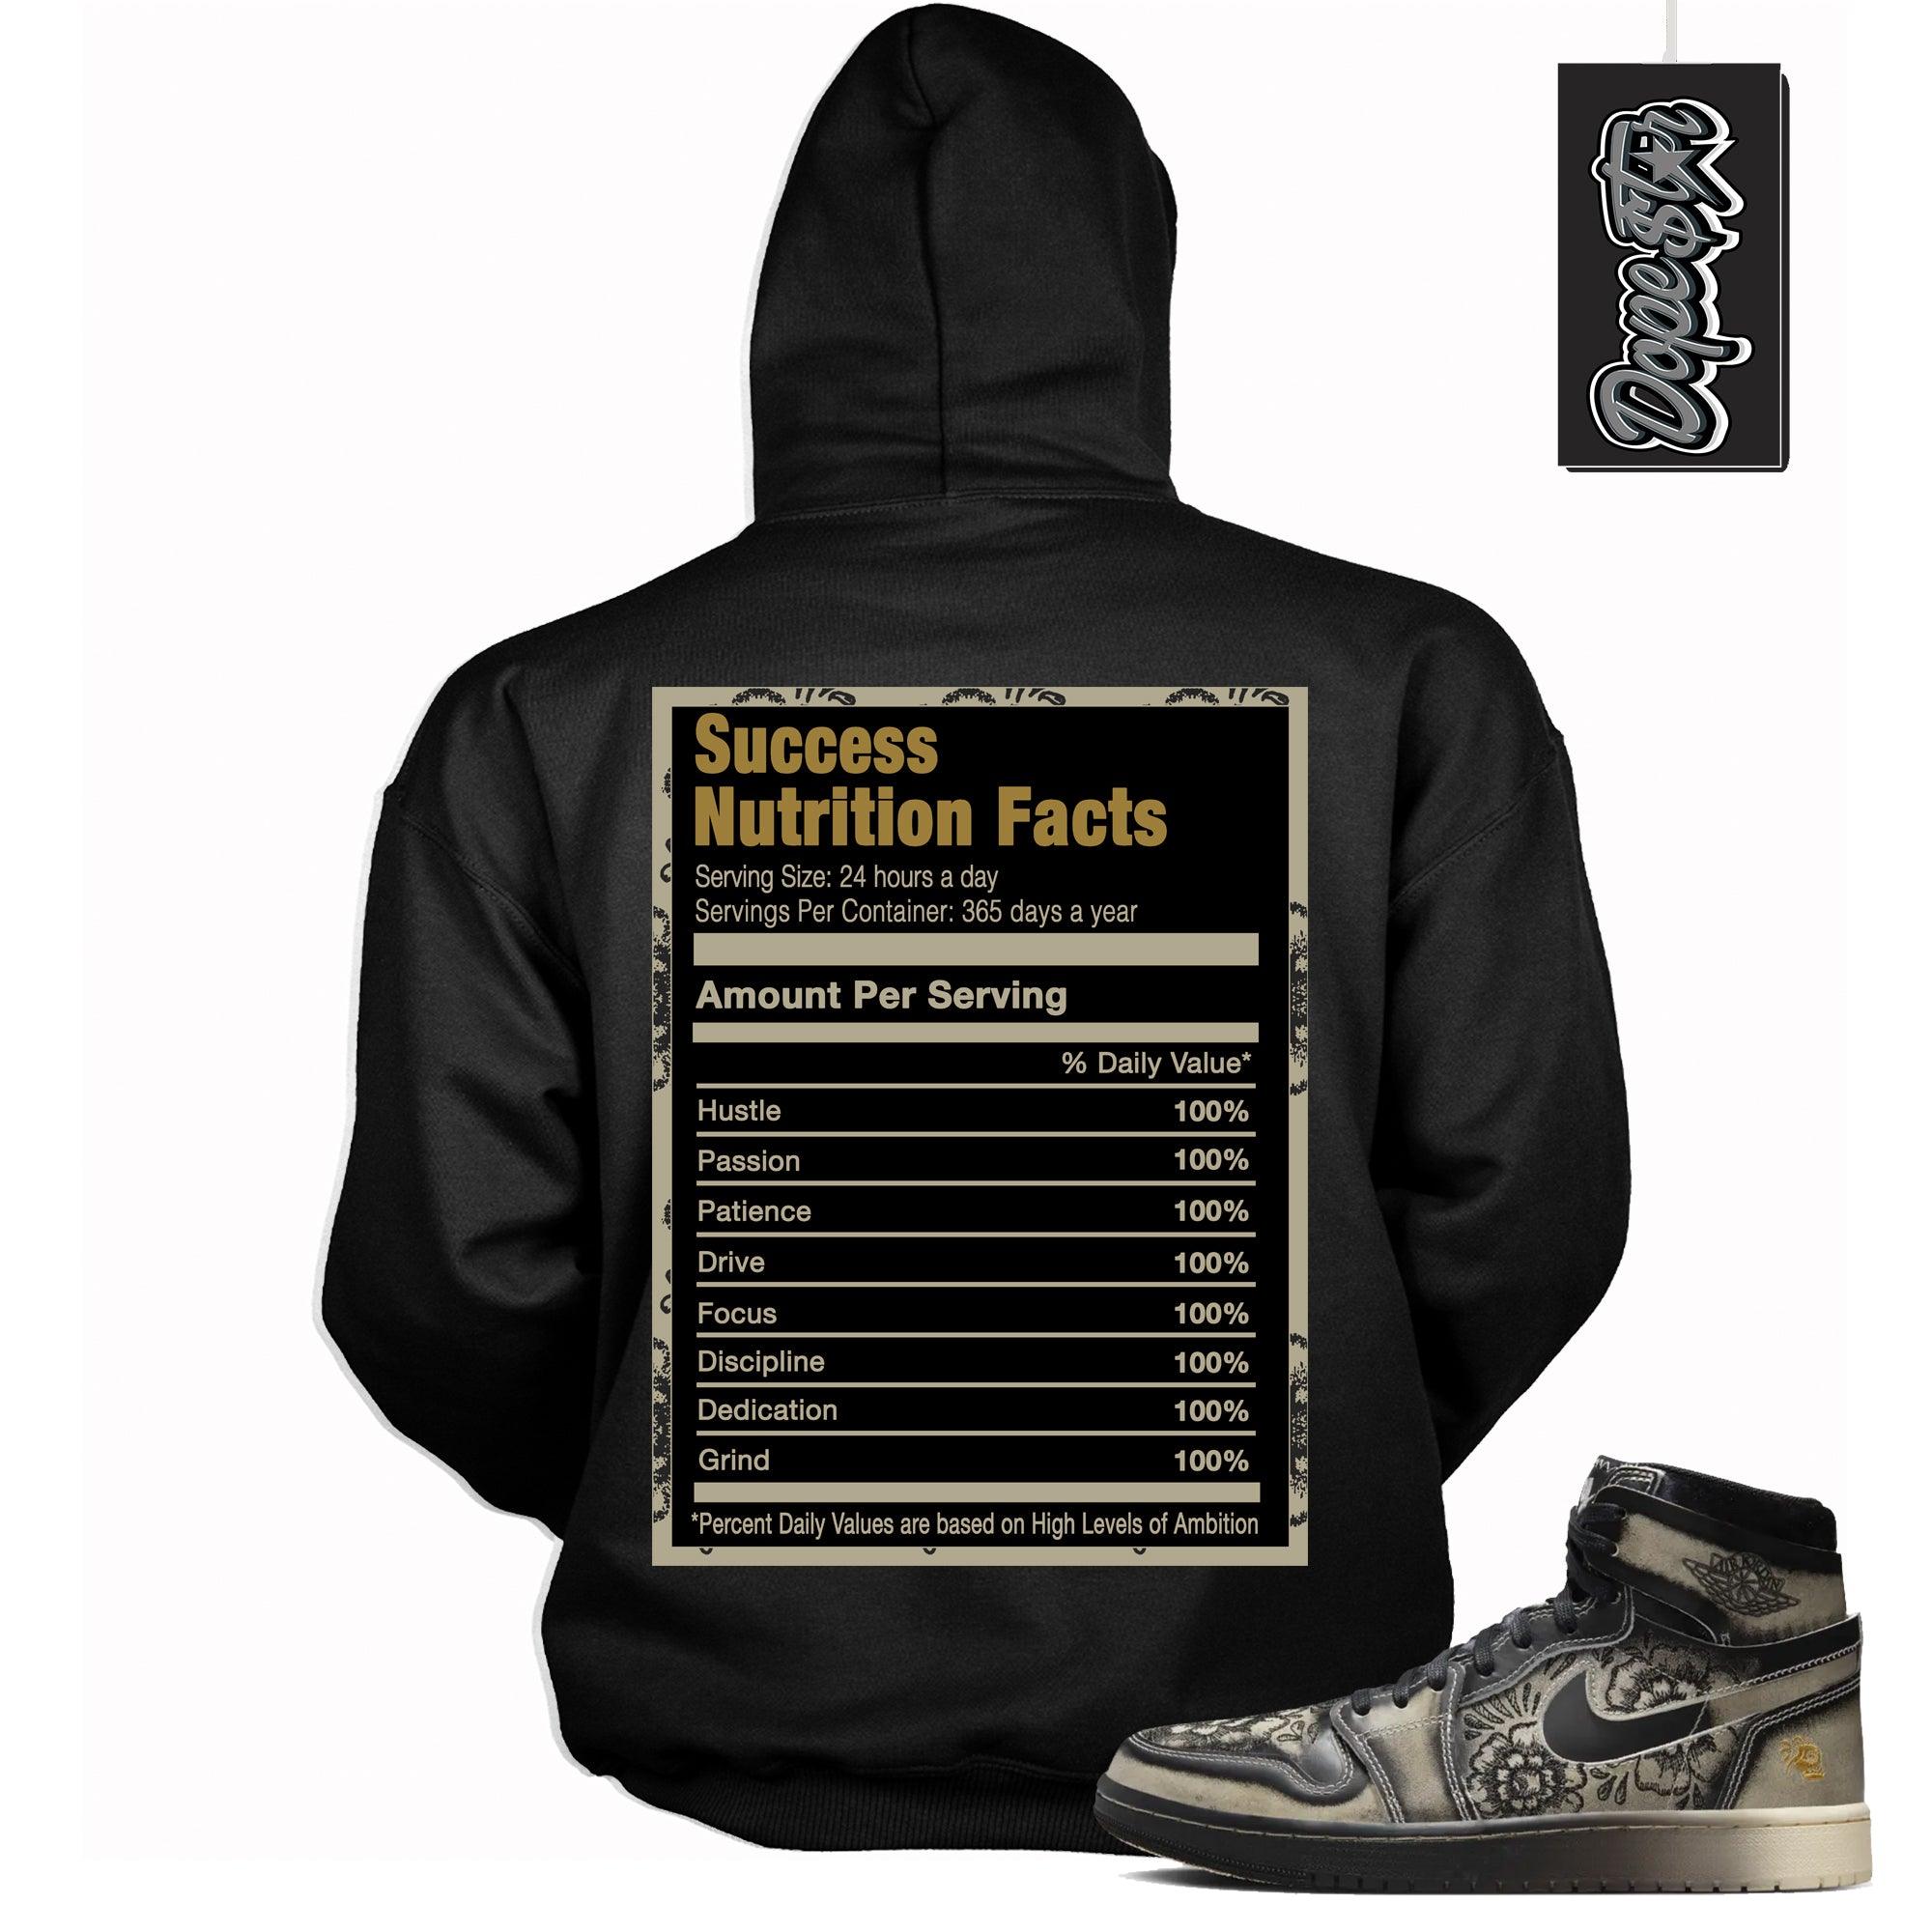 Cool Black Graphic Hoodie with “ Success Nutrition “ print, that perfectly matches Air Jordan 1 High Zoom Comfort 2 Dia de Muertos Black and Pale Ivory sneakers